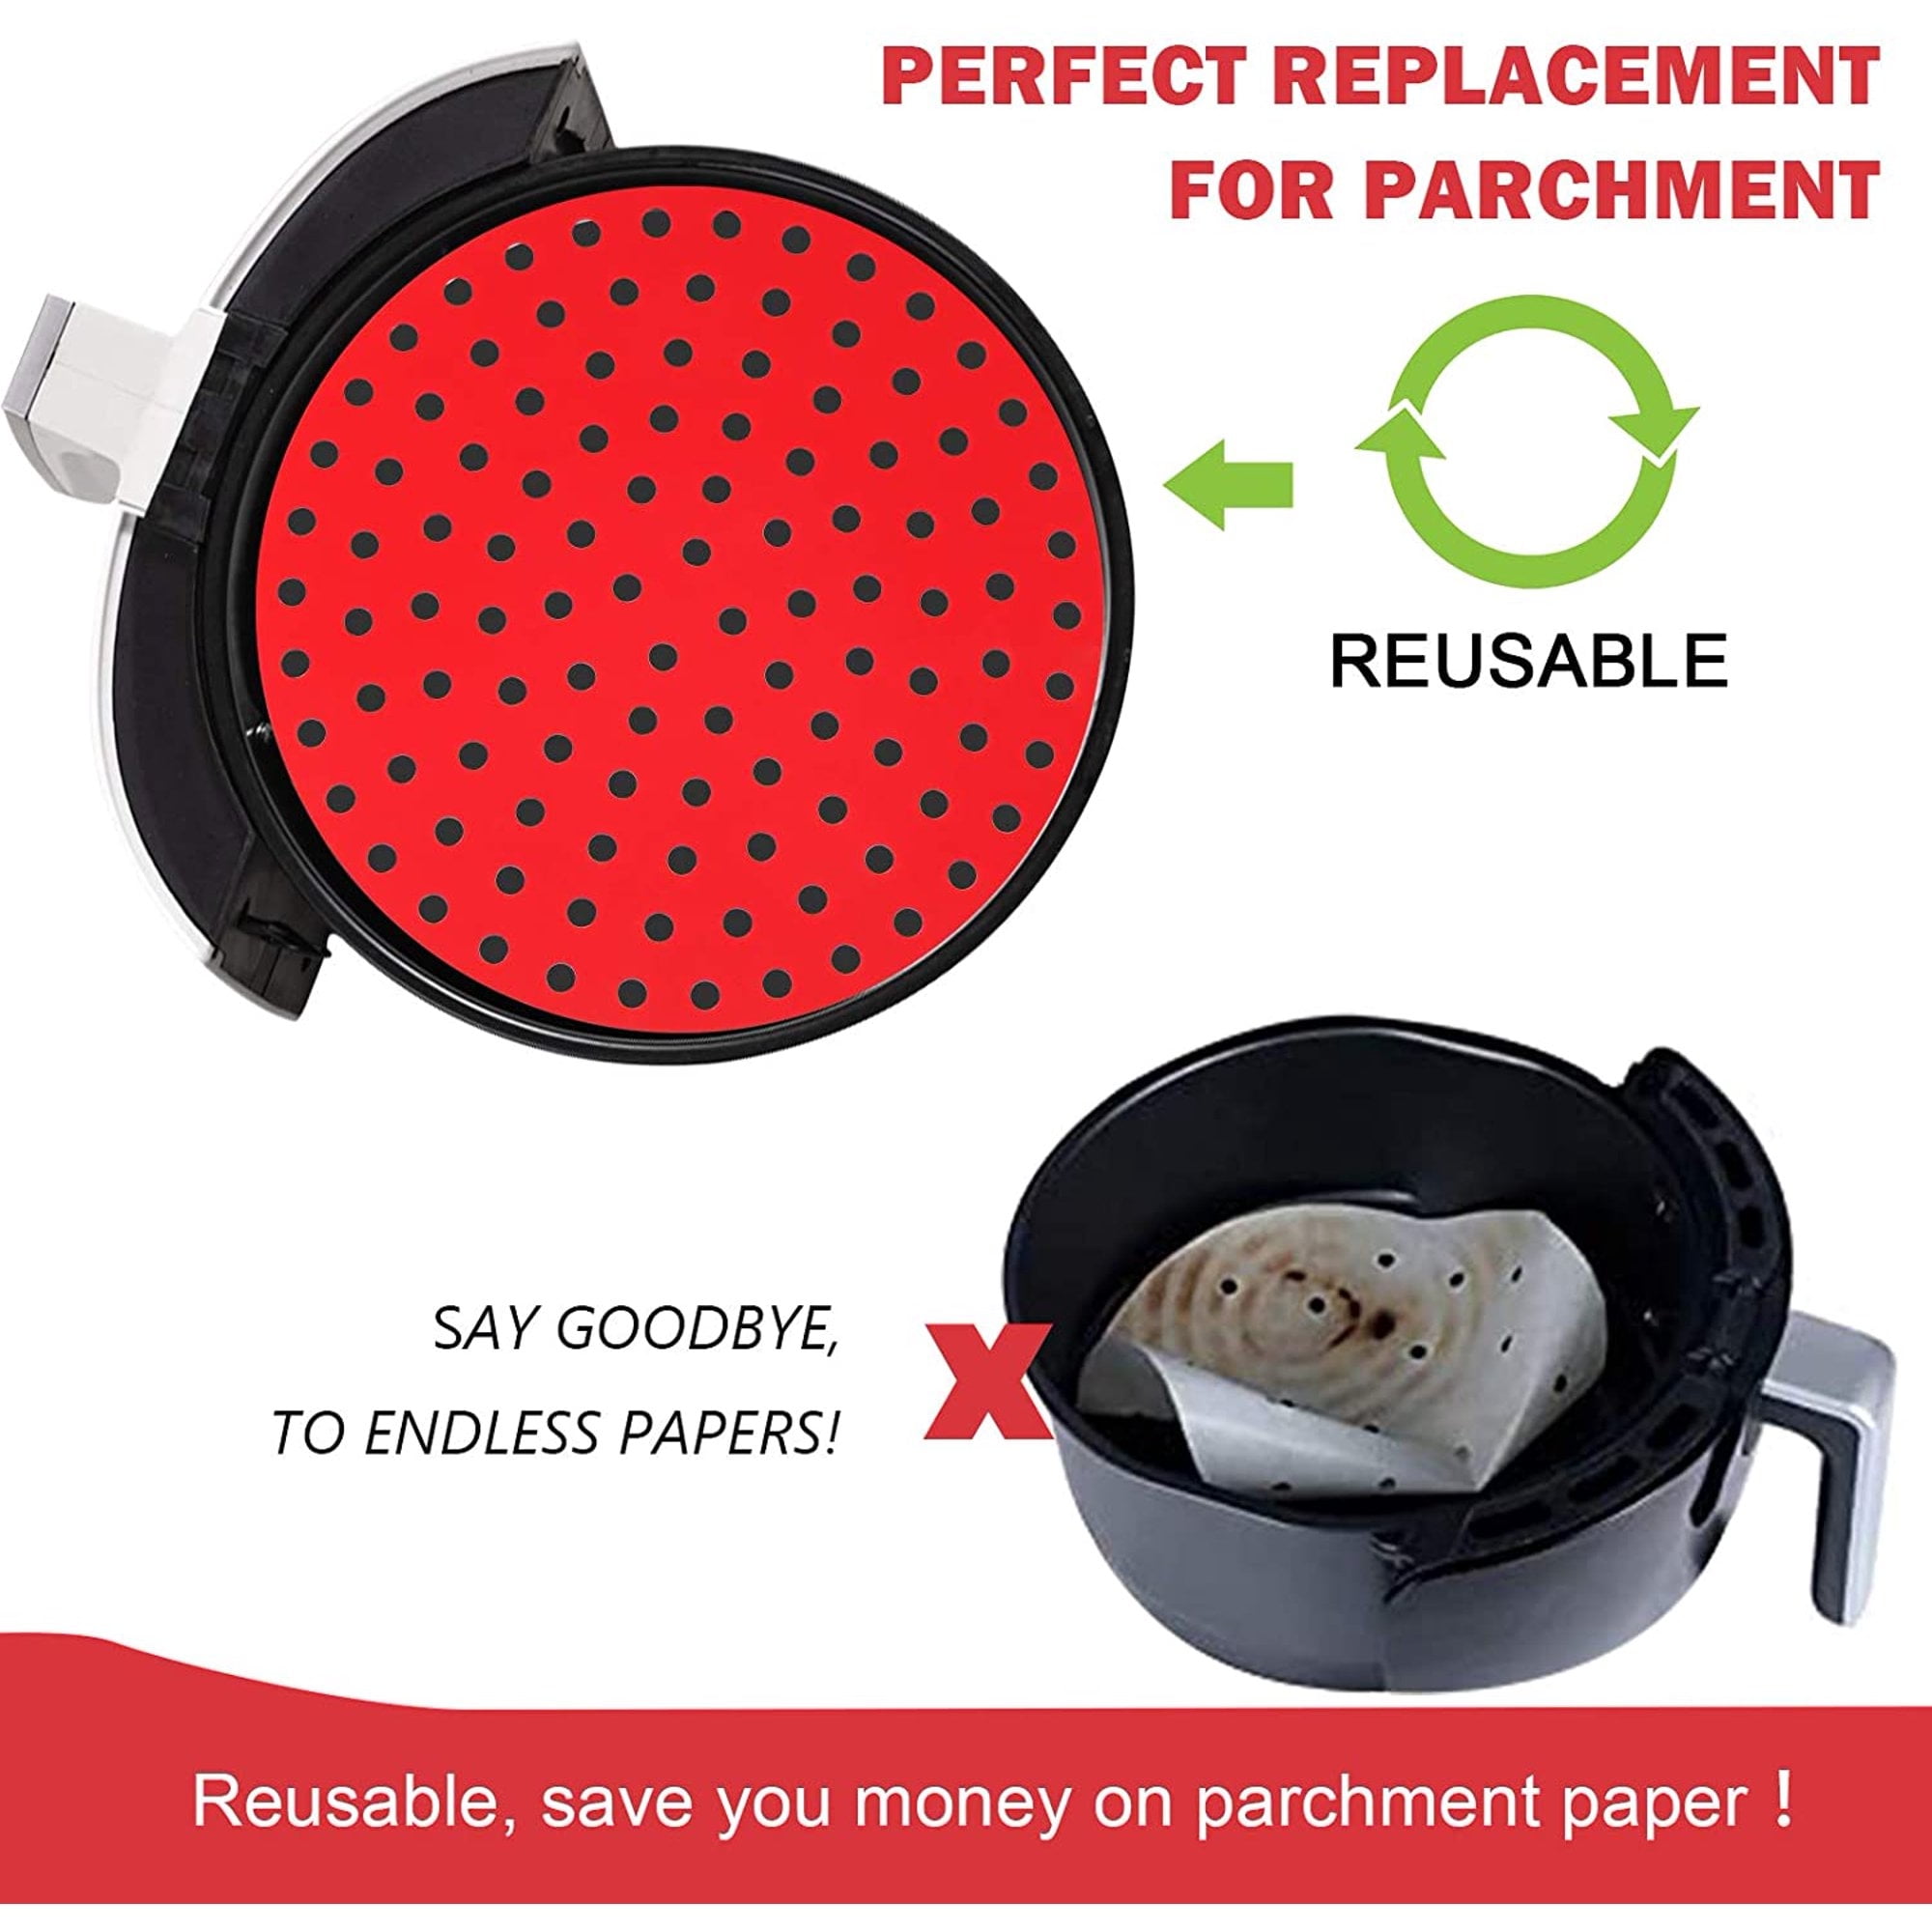 LEERUI 2 PCS Reusable Air Fryer Liners, 8/9 Inch Round Perforated Air Fryer  Basket Silicone Mats Non-Stick,Red Black 